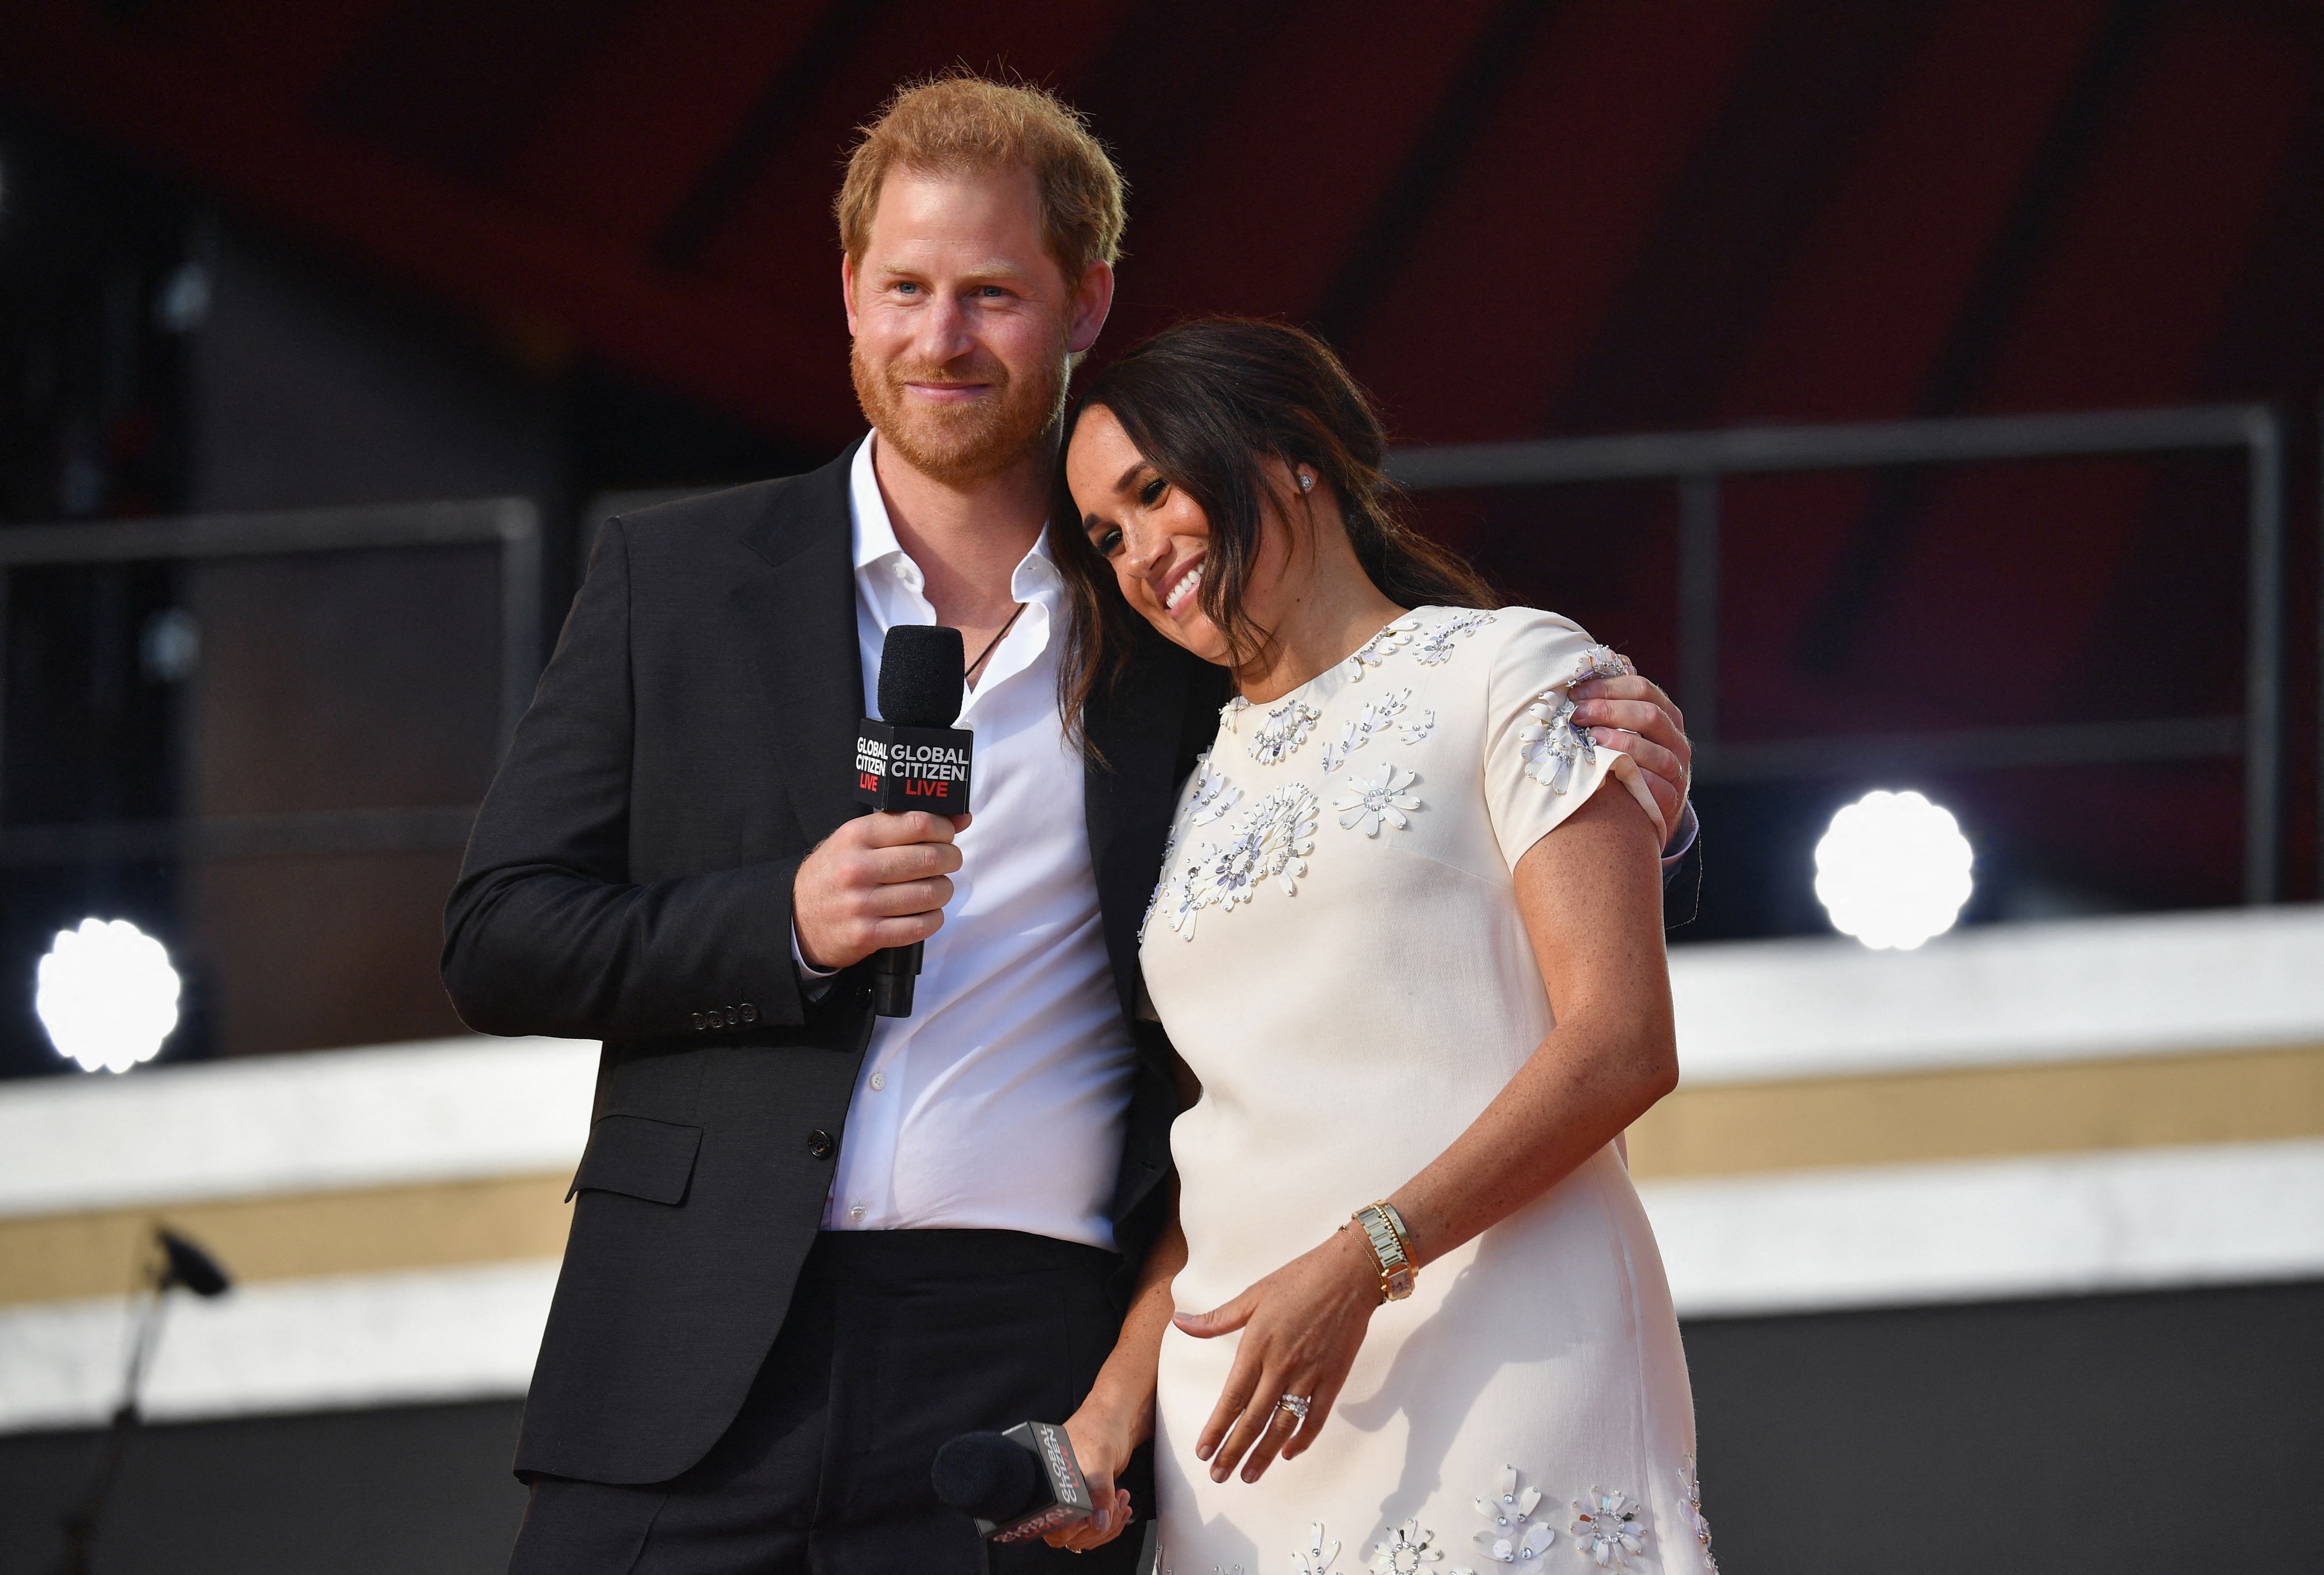 Prince Harry and Meghan Markle laughing and sharing a sweet moment onstage during the 2021 Global Citizen Live event